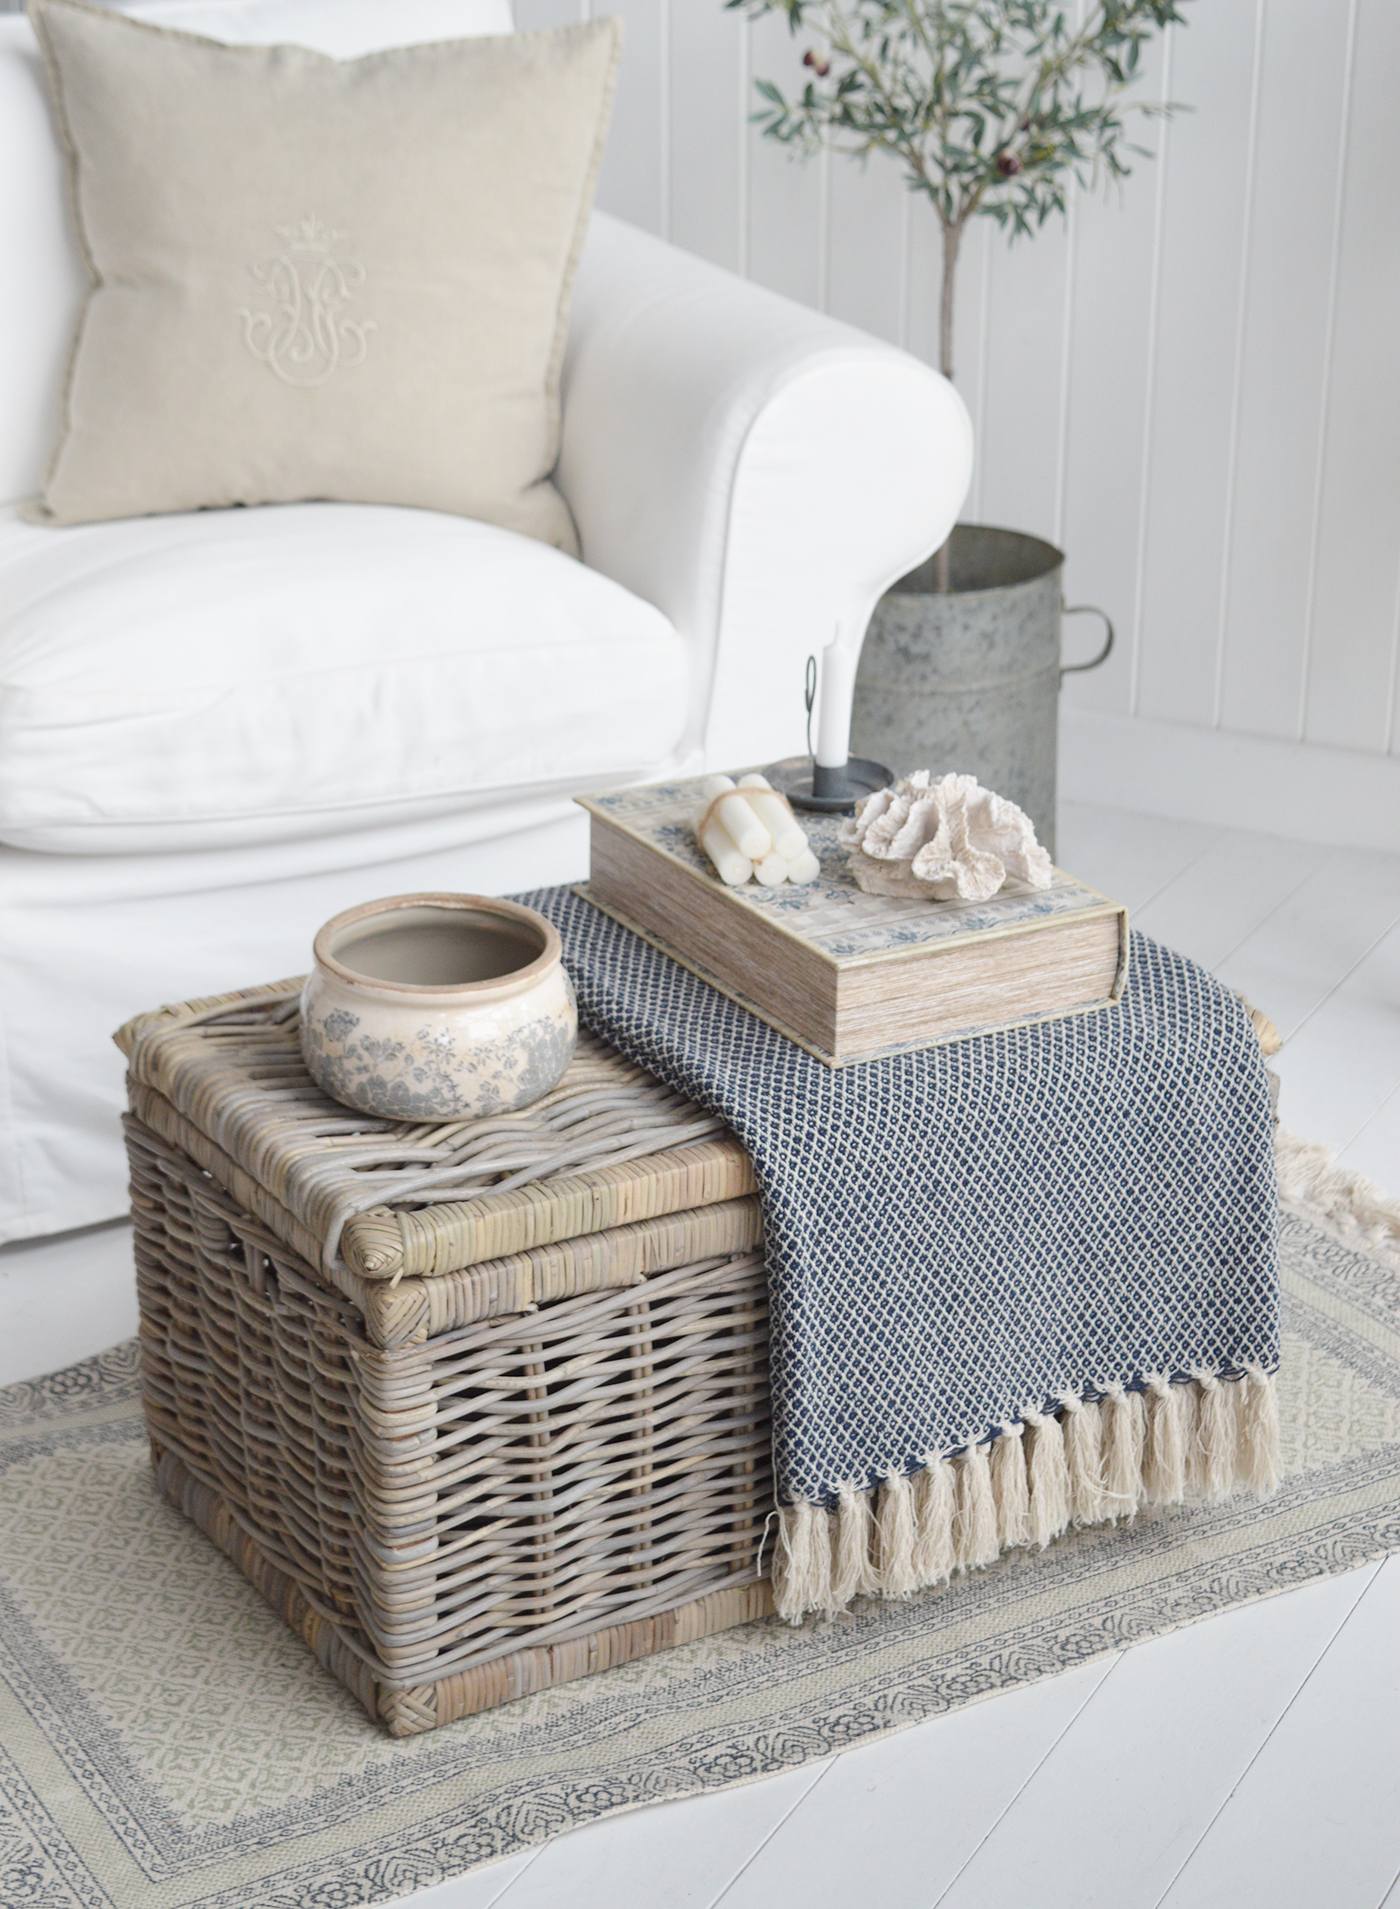 Willow storage coffee table for New Engladn Interiors. Coastal, modern country and farmhouse furniture and home decor